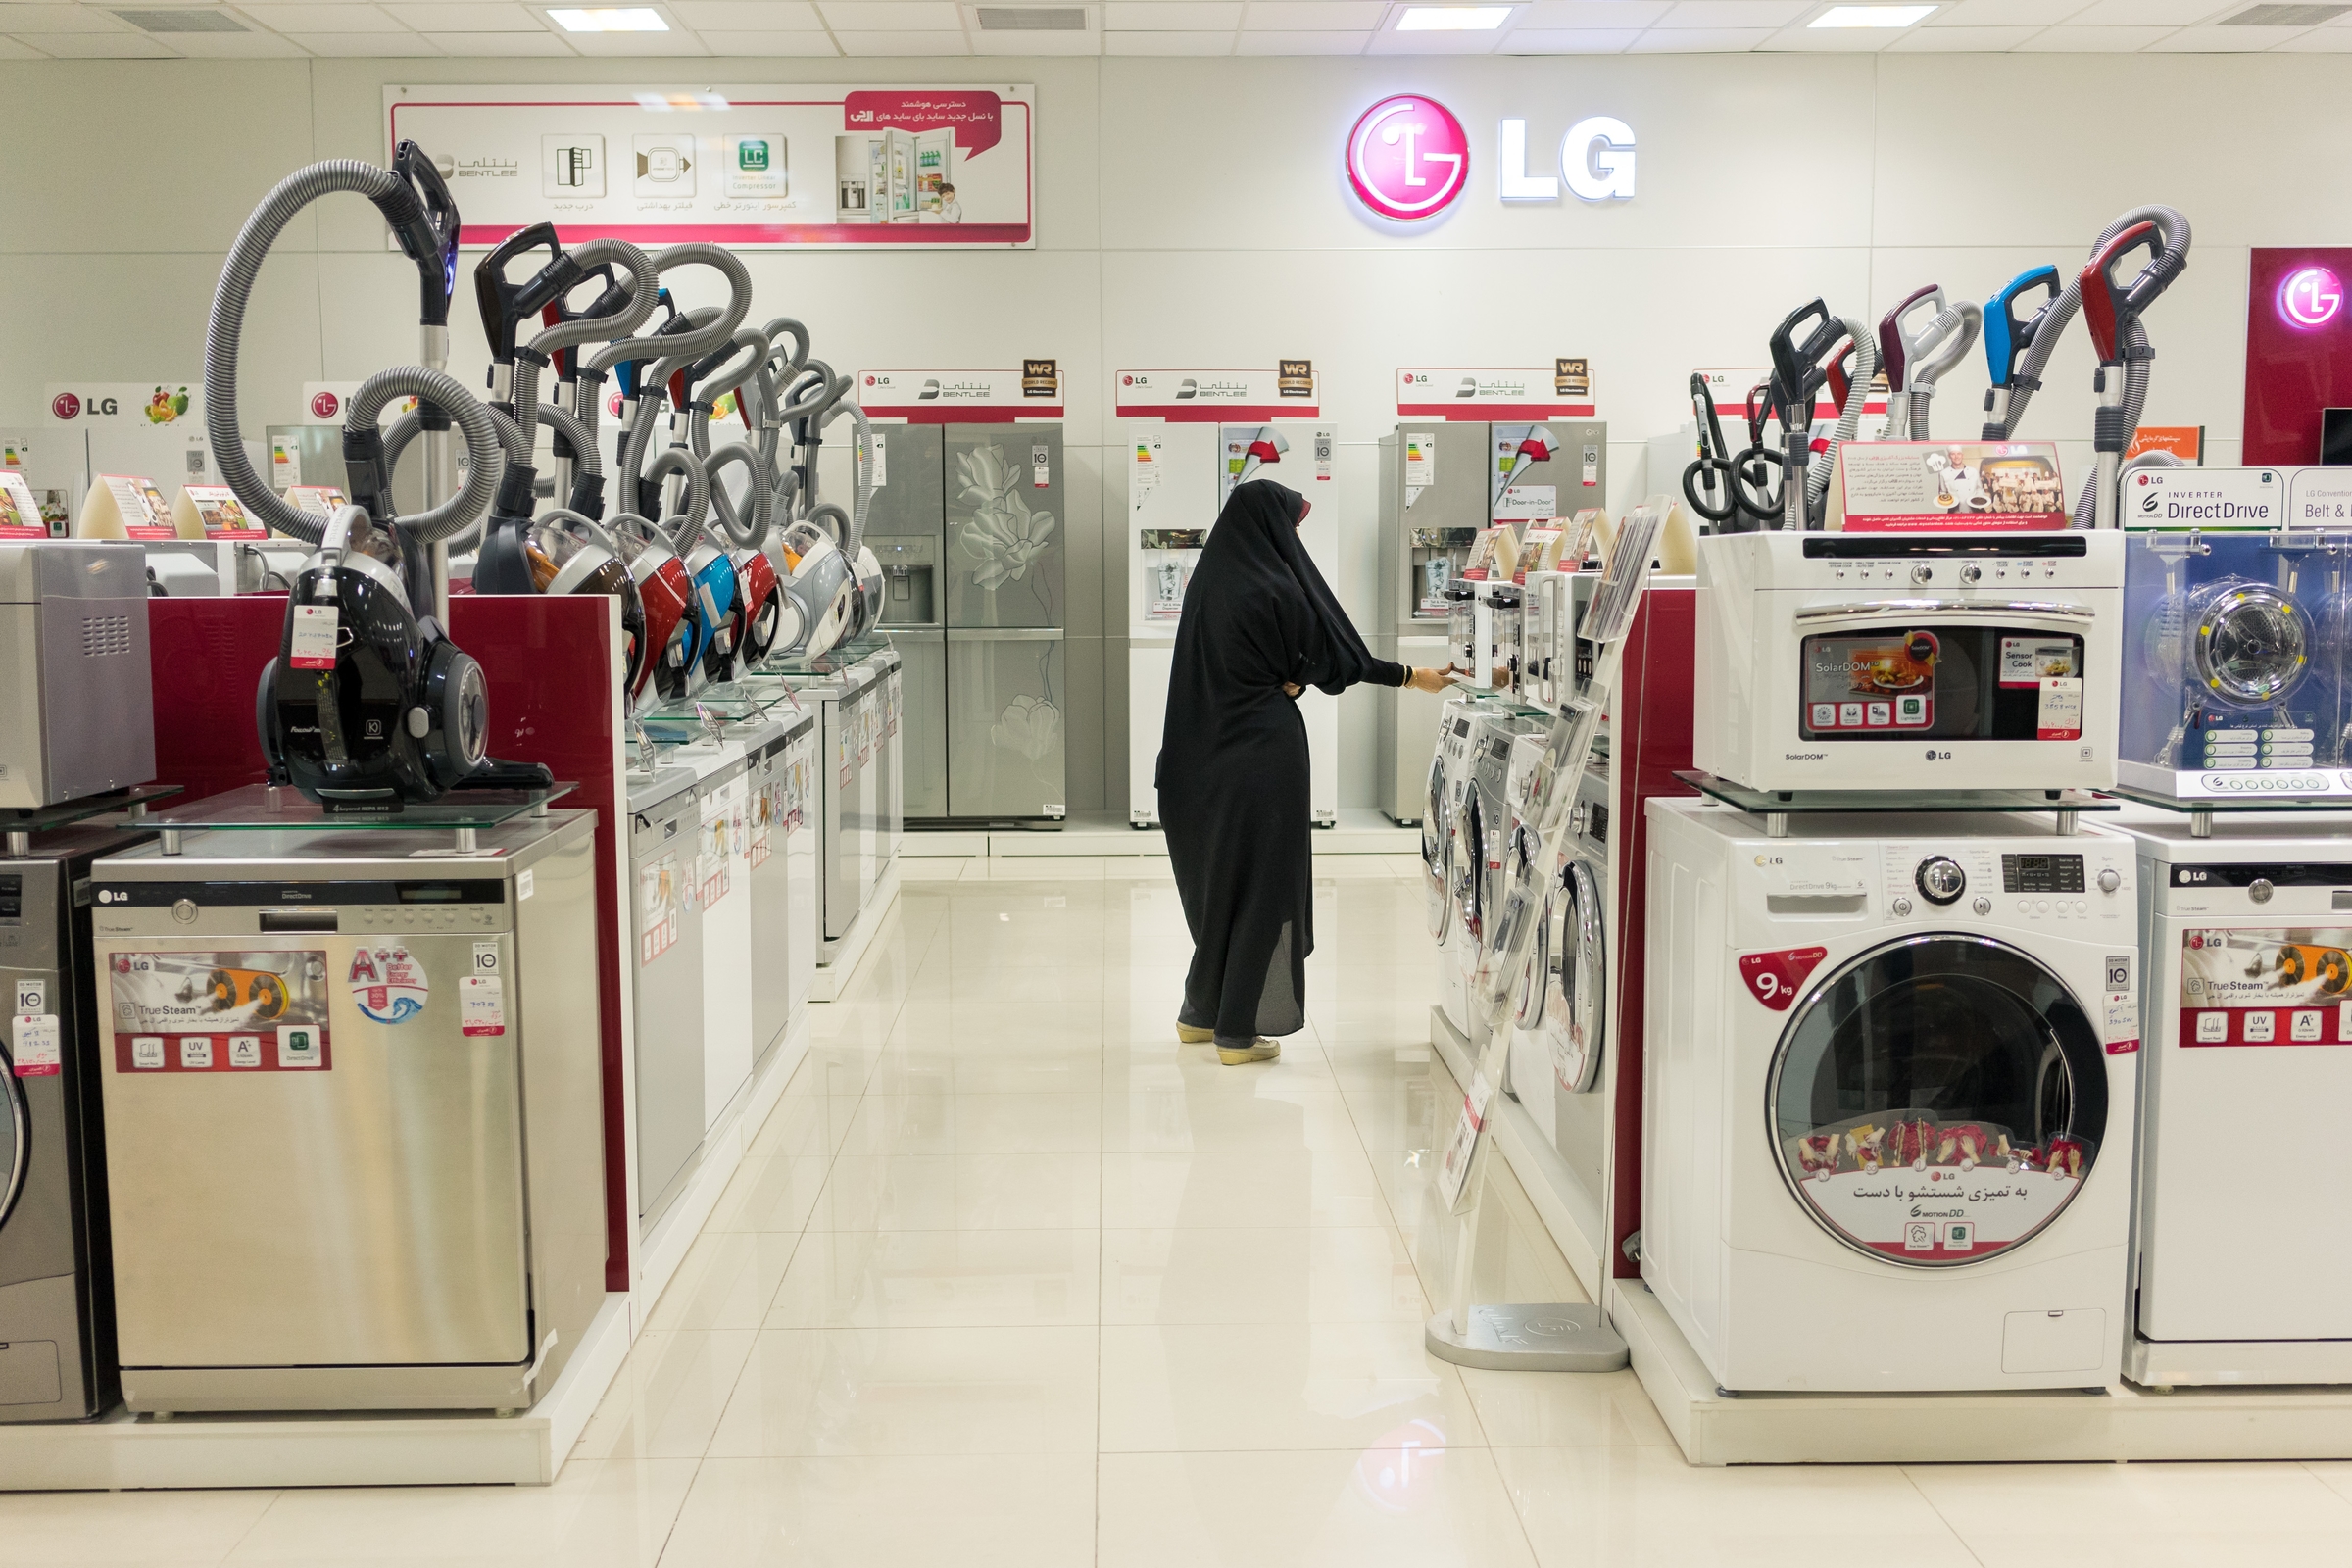  An Iranian woman shops for appliances at the Isfahan City Center Mall, Iran's largest. Foreign appliance manufacturers such as Korea's LG have come to dominate Iran's market. Iran's domestically produced Arj brand ceased operations this year after 8